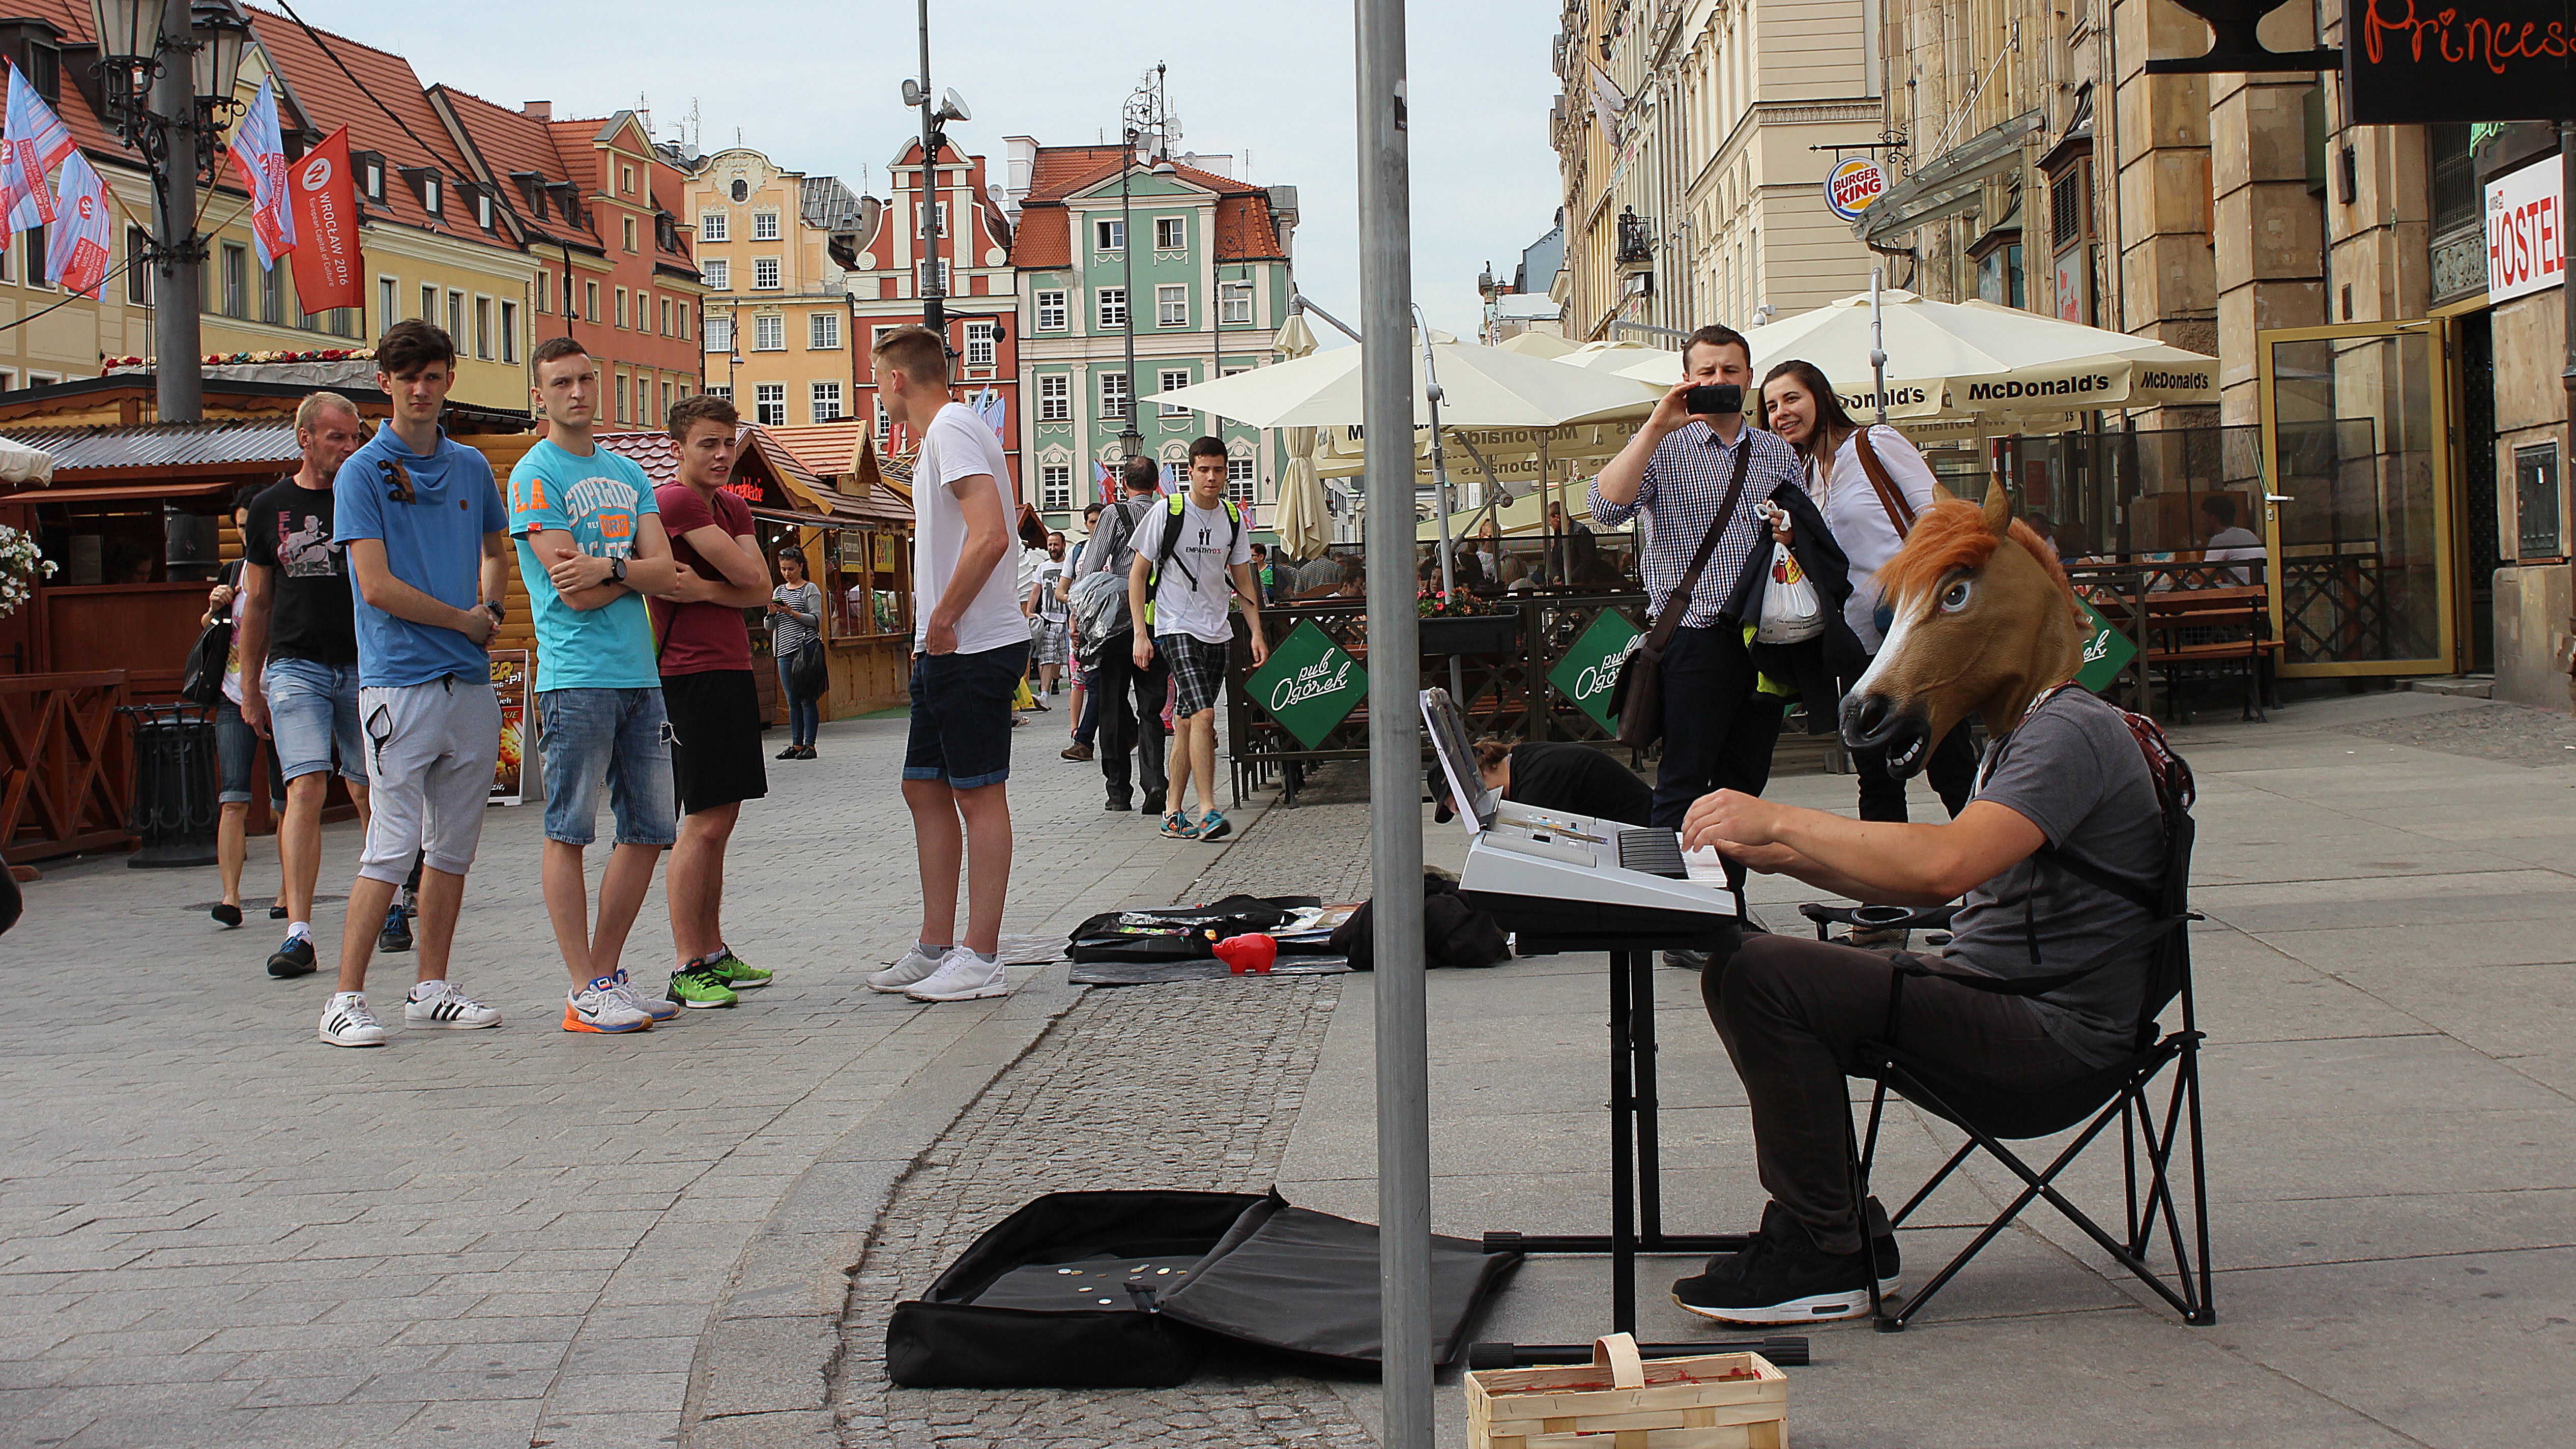 A street musician playing a keyboard with a horse mask in Wrocław, Poland.